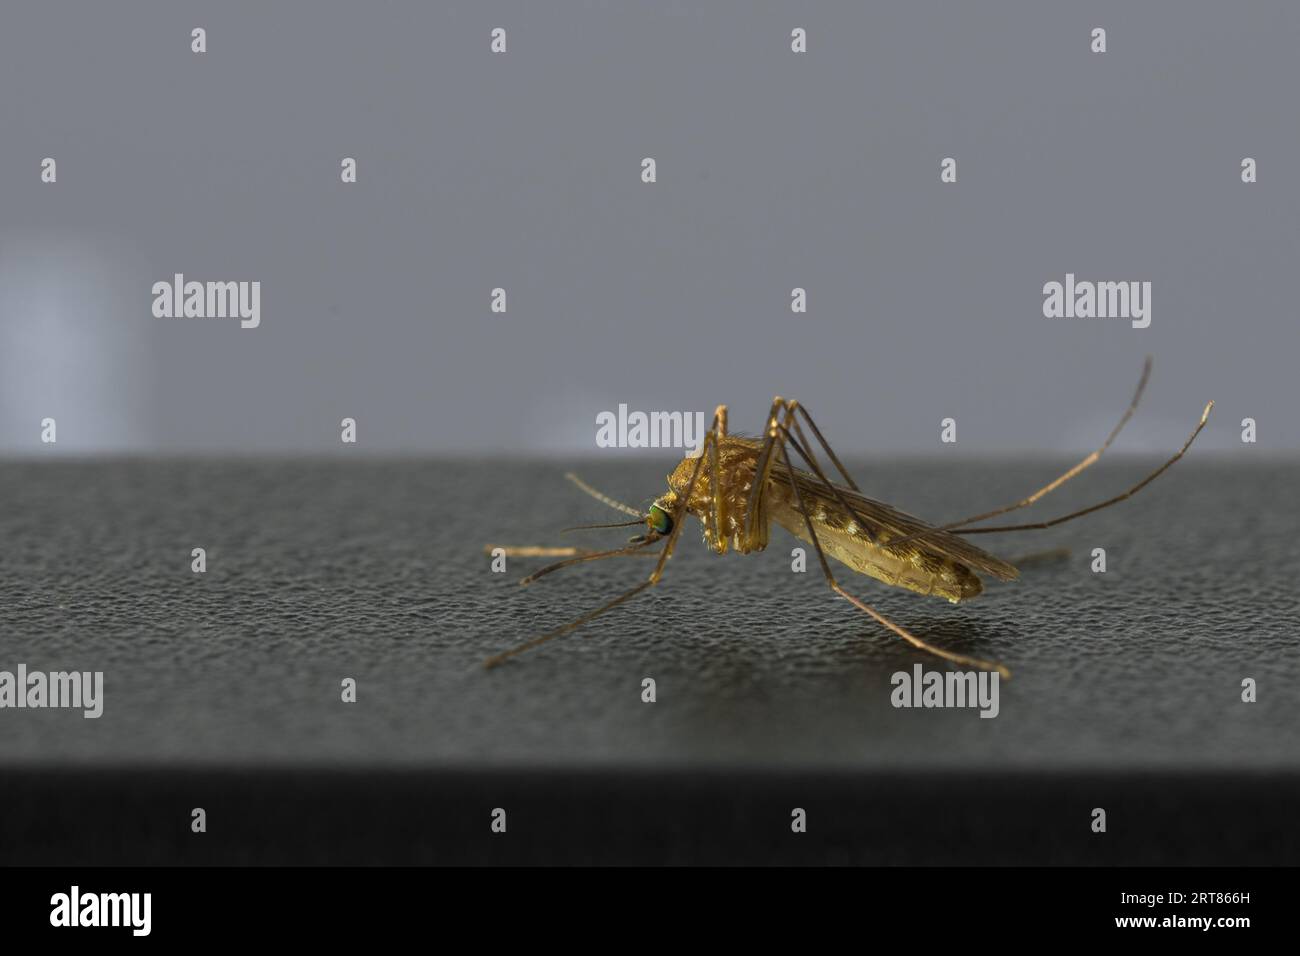 Close up of annoying small mosquito sitting on top of black computer monitor in home office deviating from doing work Stock Photo